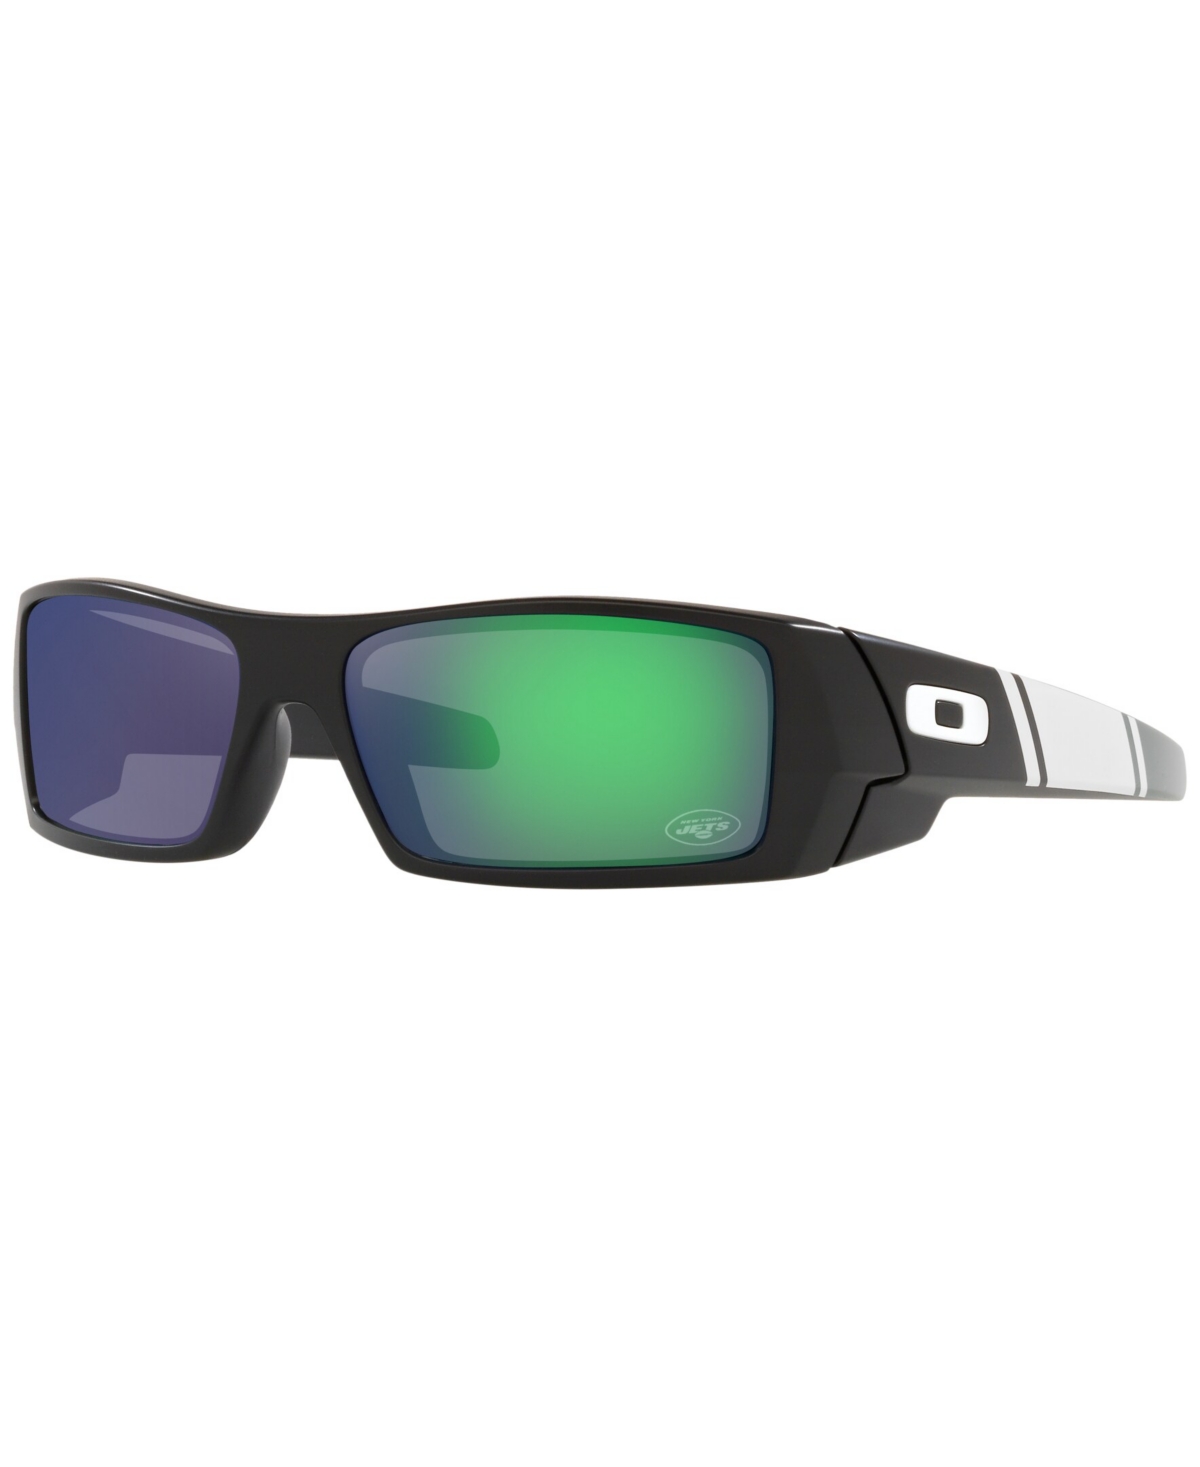 Shop Oakley Nfl Collection Men's Sunglasses, New York Jets Oo9014 60 Gascan In Nyj Matte Black